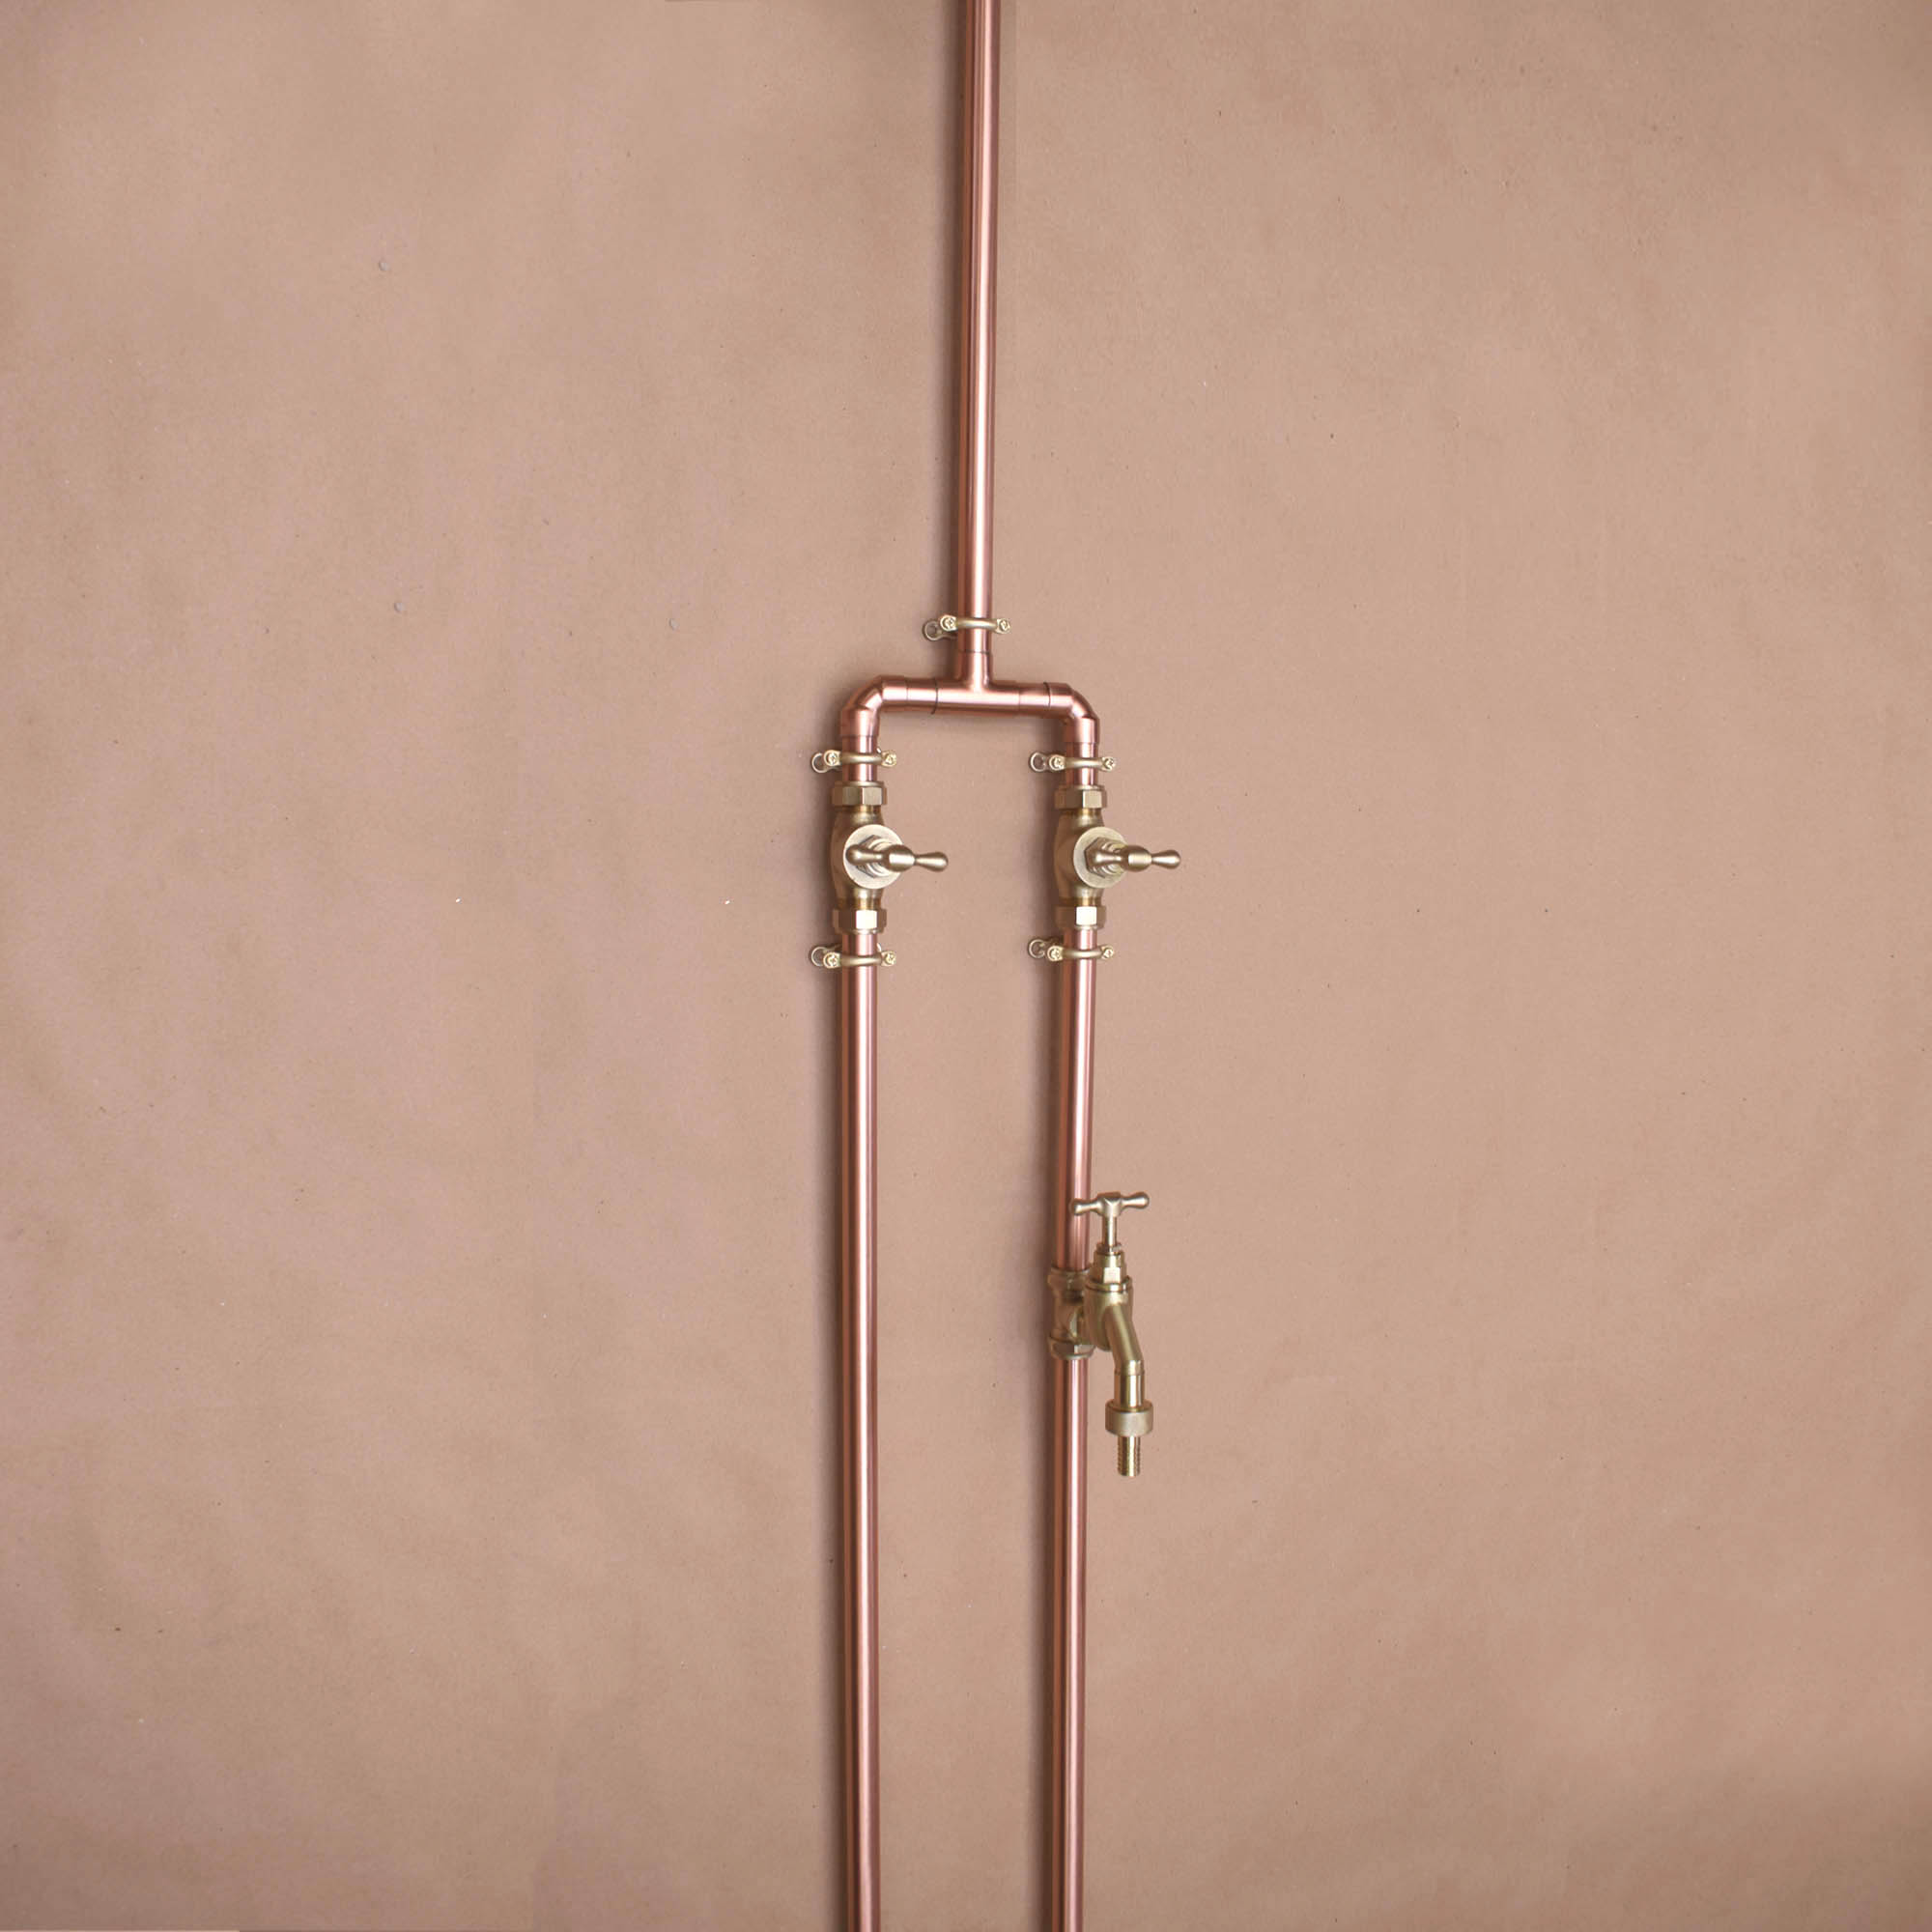 full length outdoor garden shower design. made from copper and brass with hose tap